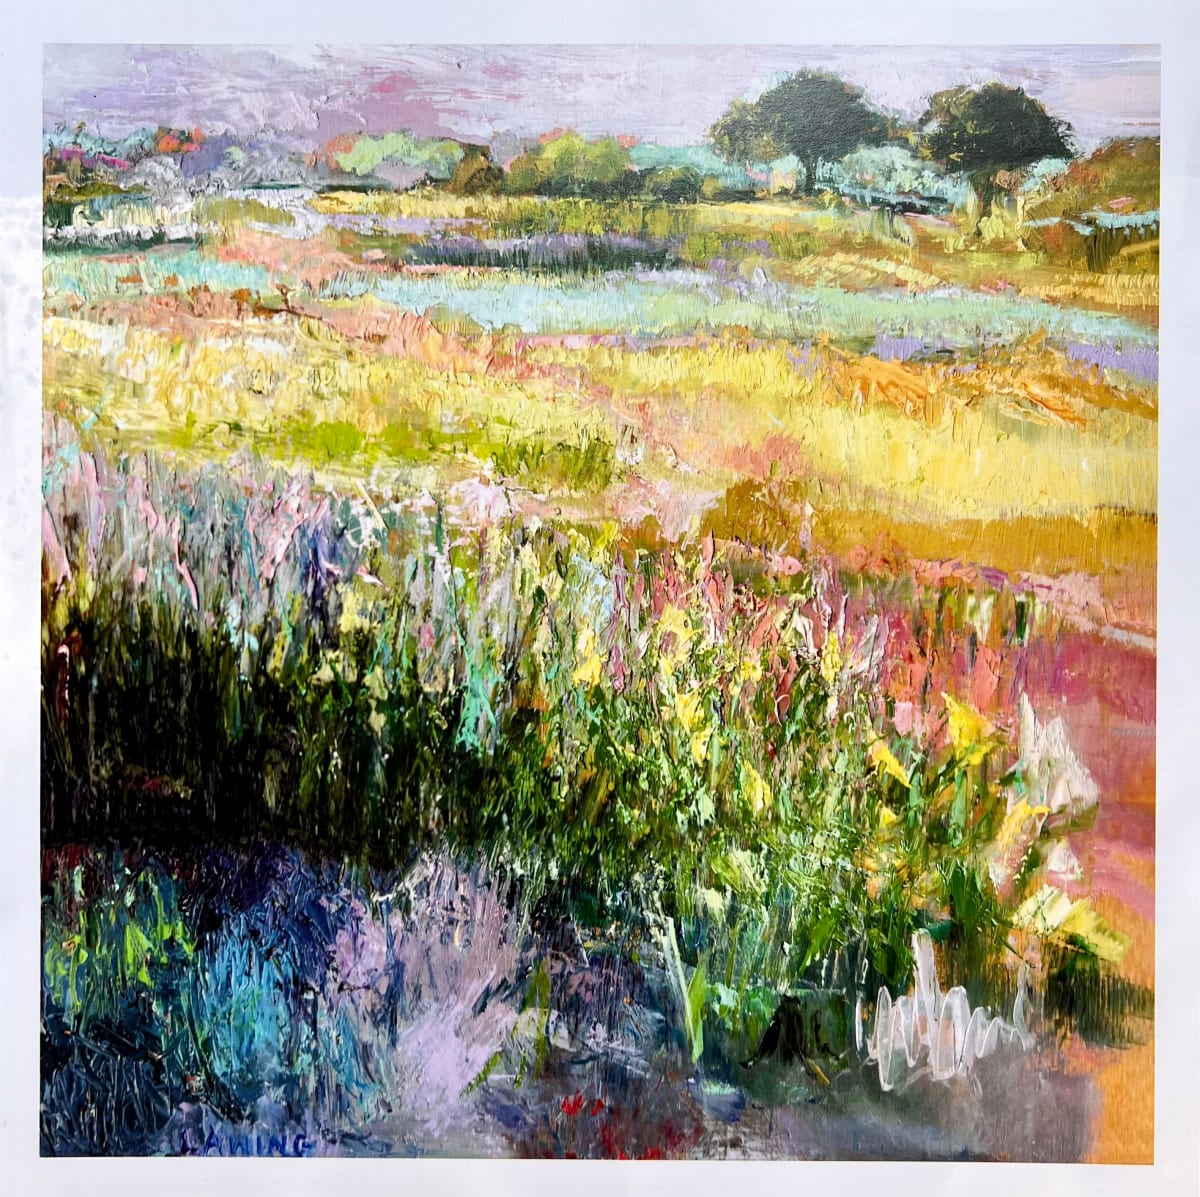 Something Beautiful print by Julia Chandler Lawing  Image: 13x13 print of Julia’s “Something Beautiful” signature marshscape oil painting 